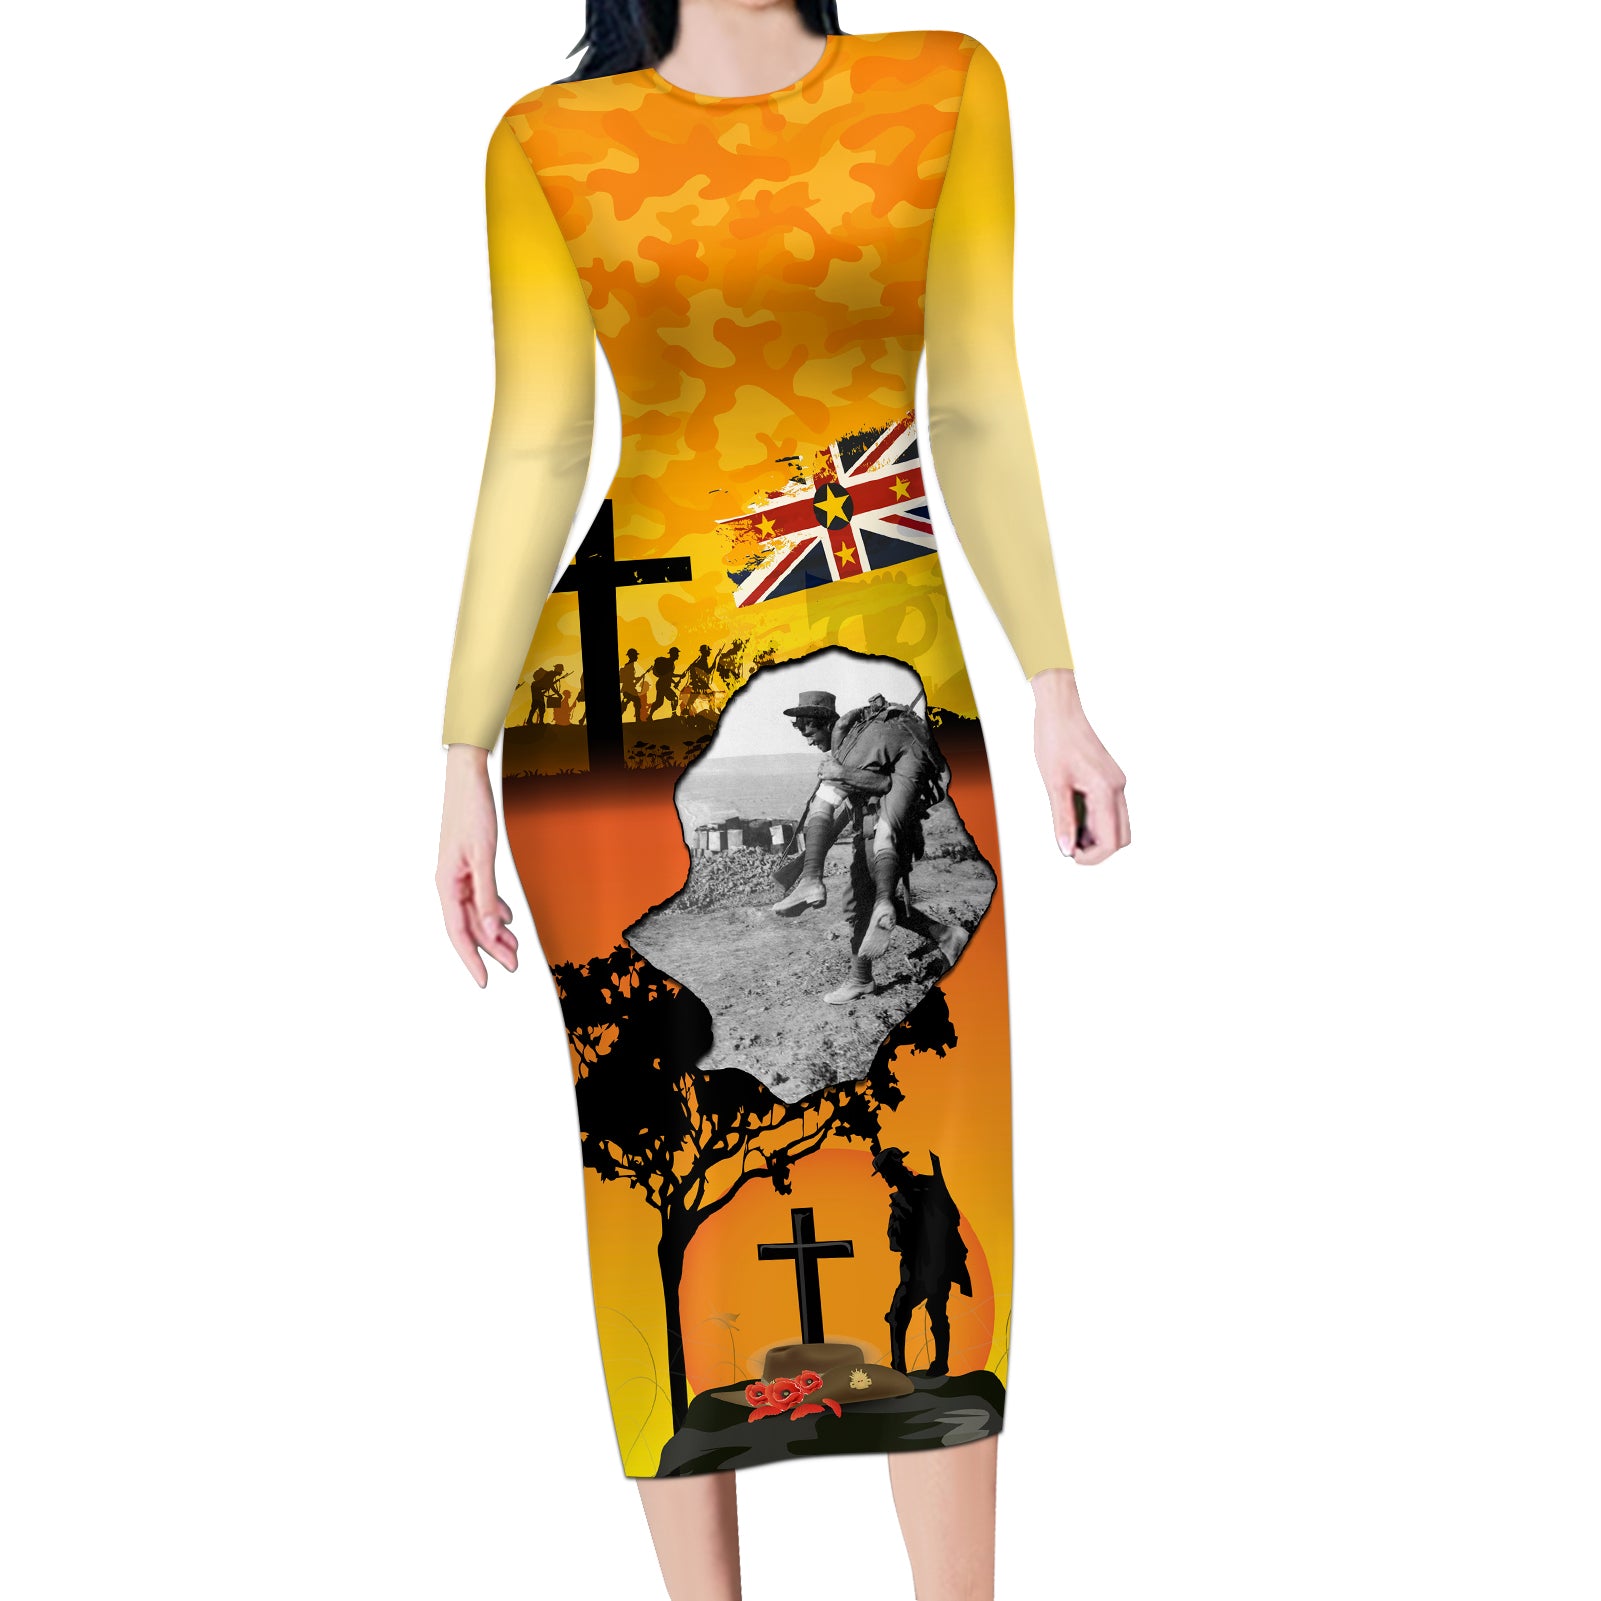 Niue ANZAC Day Long Sleeve Bodycon Dress Soldier and Gallipoli Lest We Forget LT03 Long Dress Yellow - Polynesian Pride